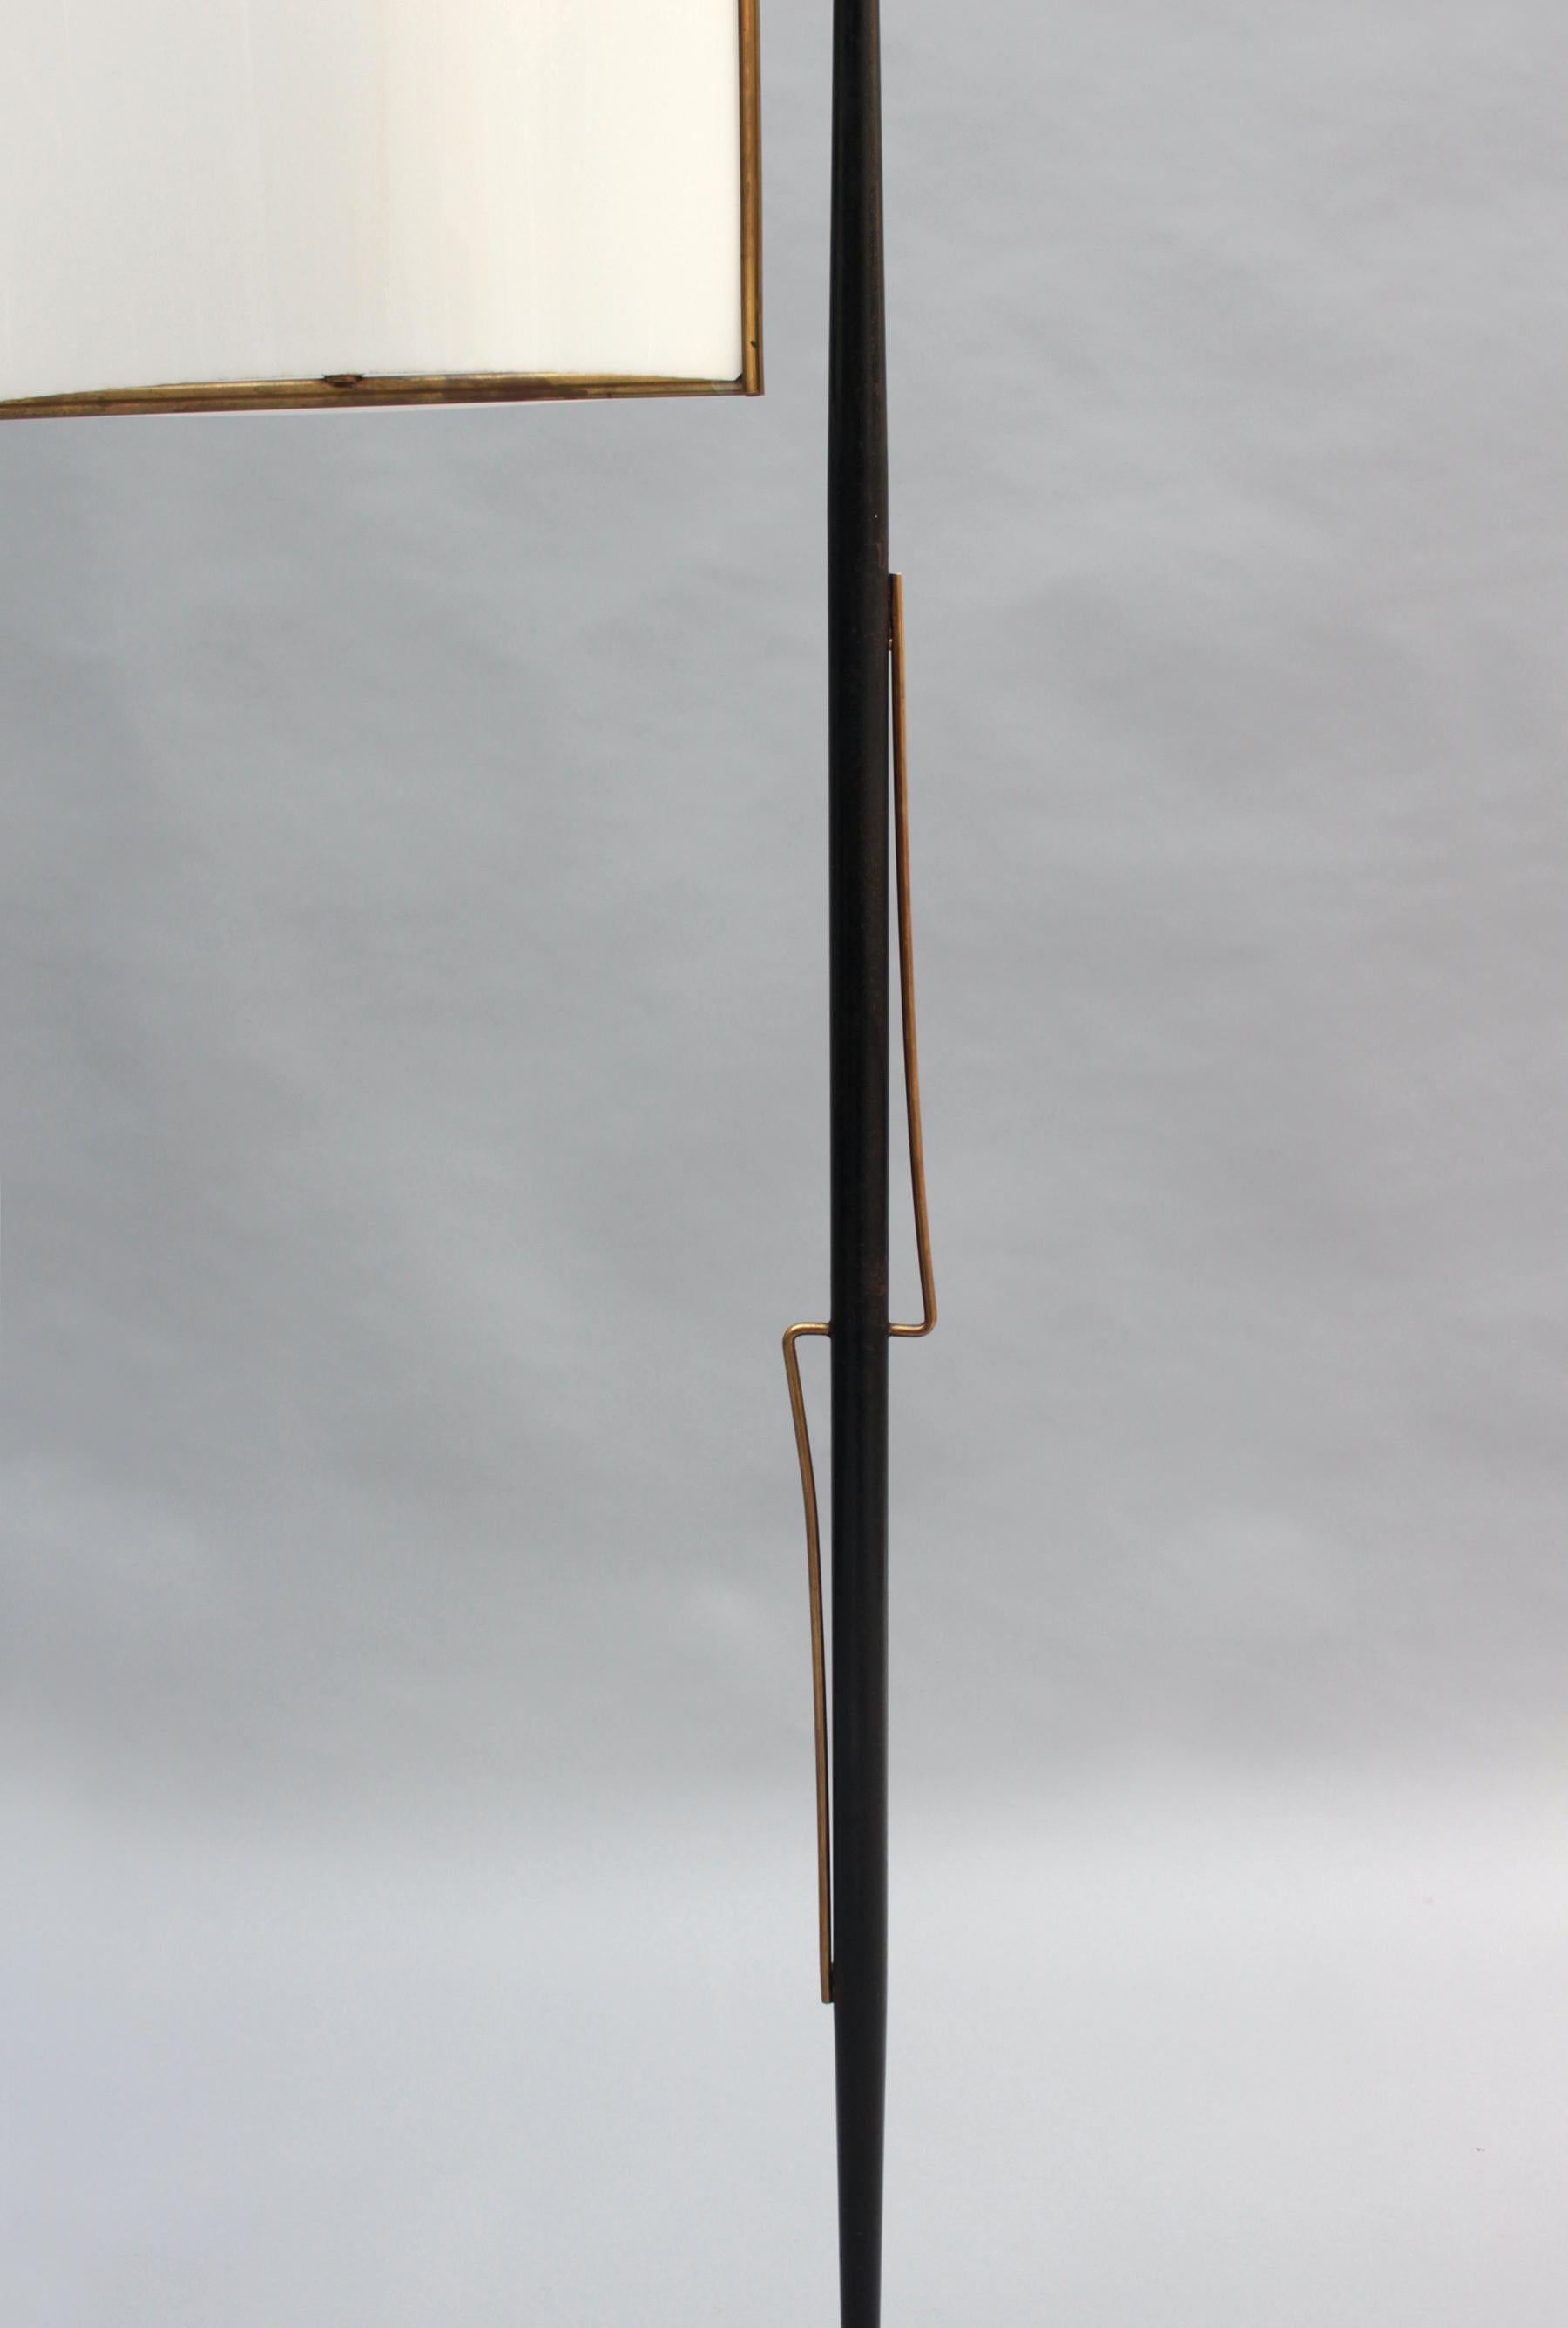 Fine French 1950s Rotating Floor Lamp by Lunel For Sale 8